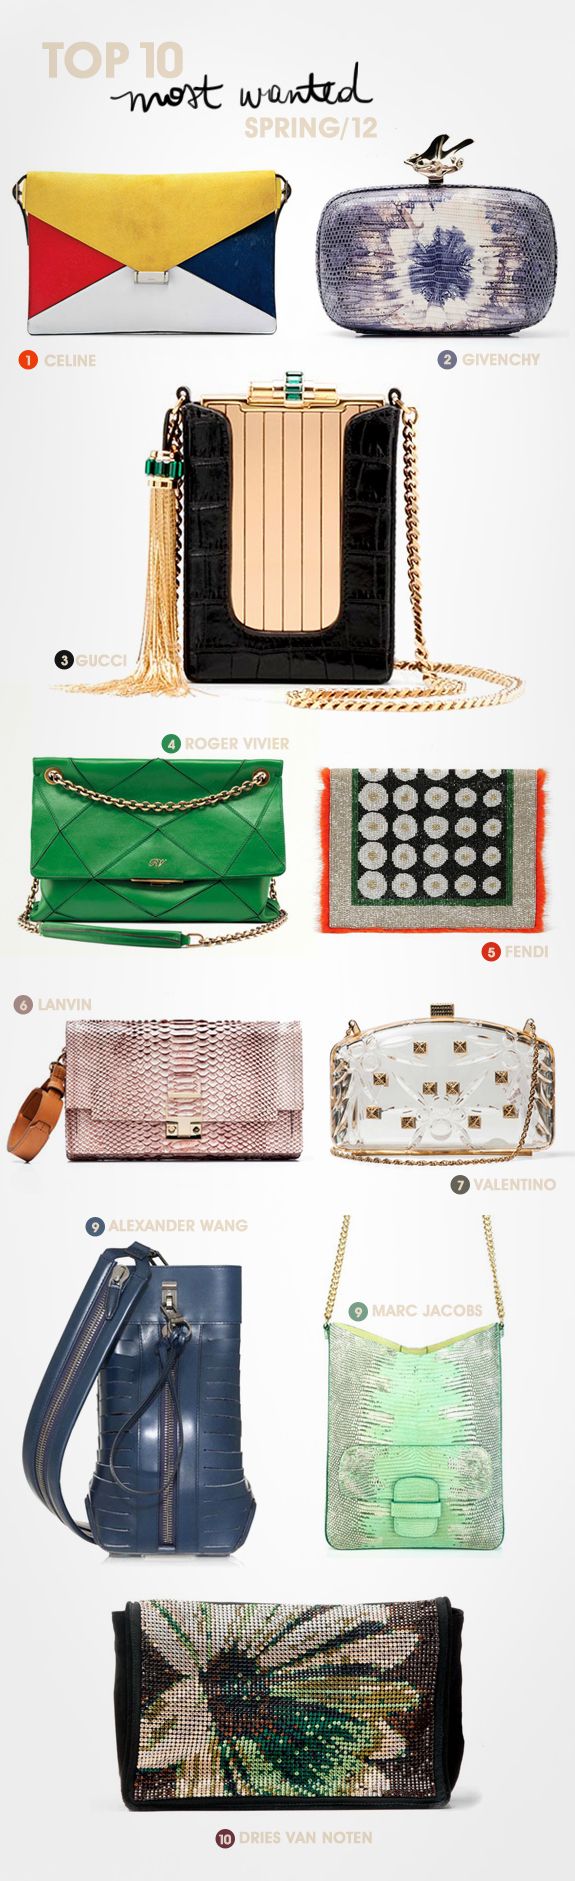 Top 10 most wanted – bags edition